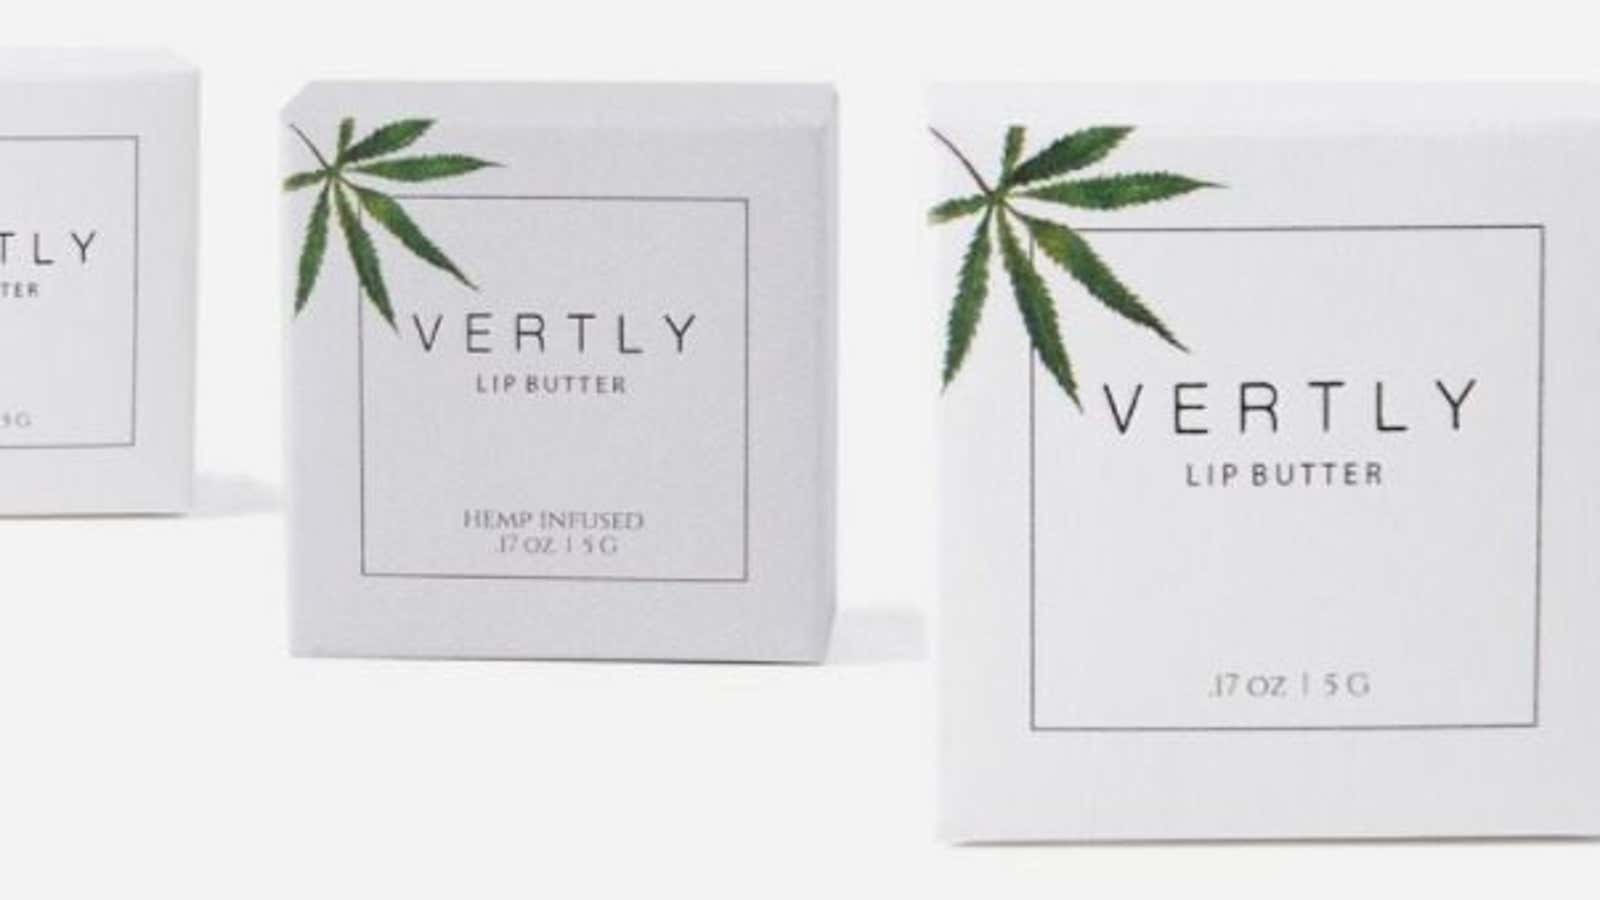 Vertly makes luxury beauty and wellness products with ingredients extracted from marijuana.